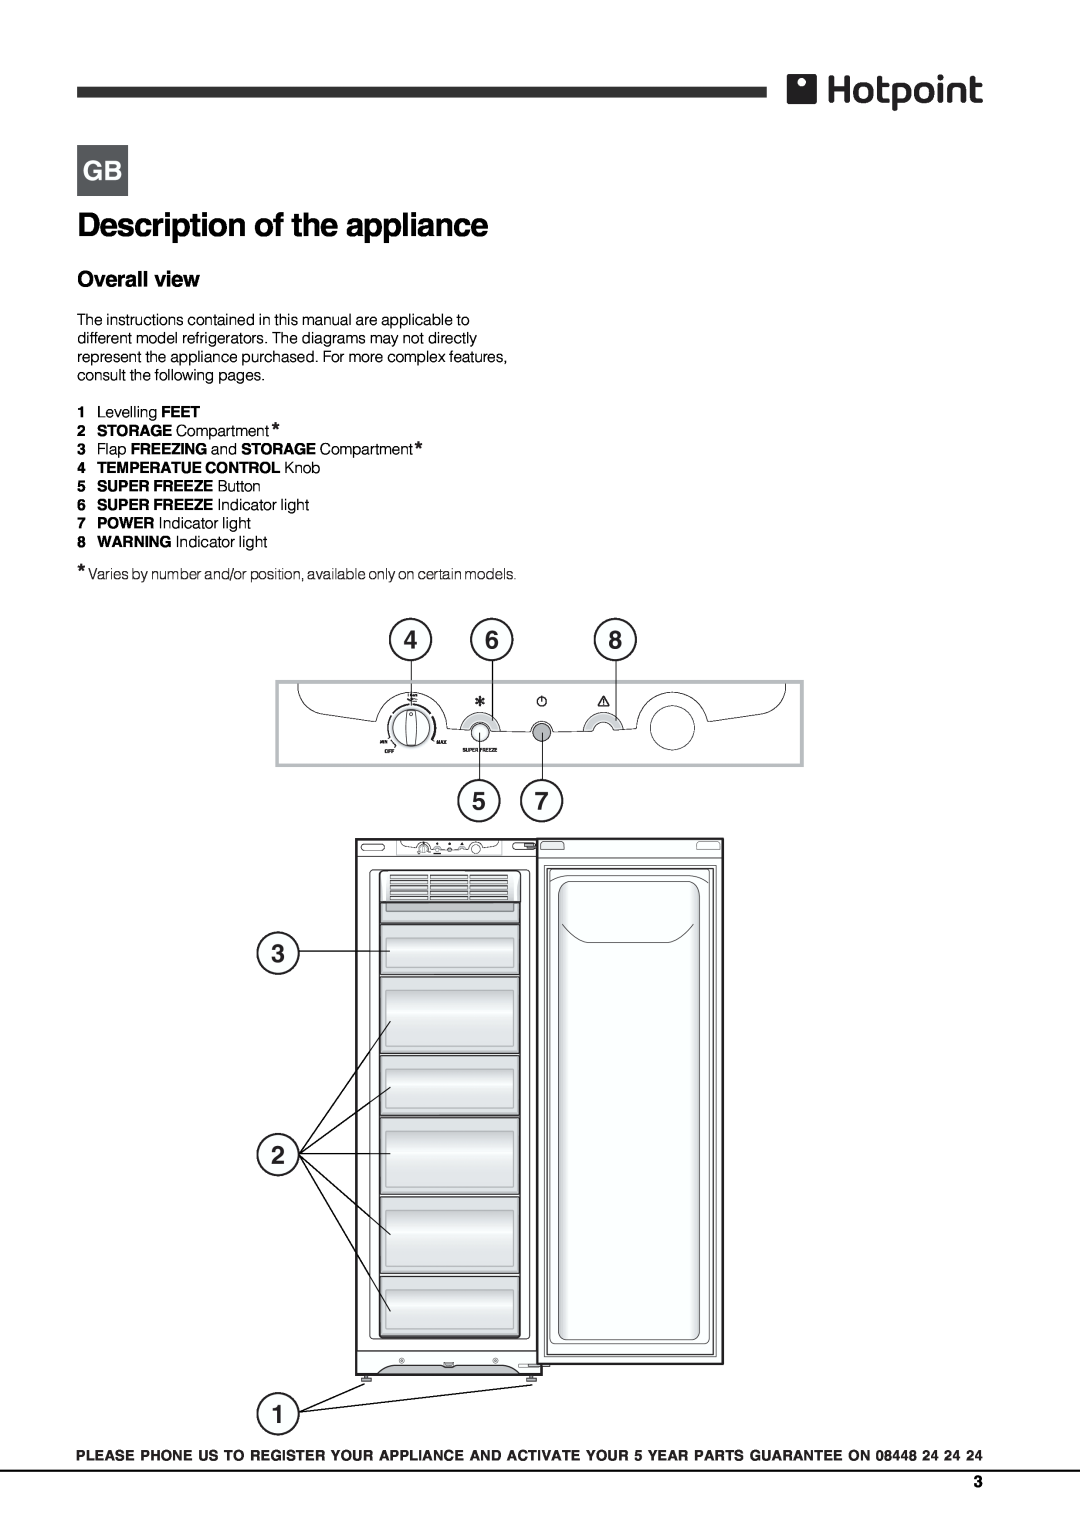 Hotpoint FZS 175 xx, FZFM 151 xx, FZFM 171 xx operating instructions Description of the appliance, Overall view 